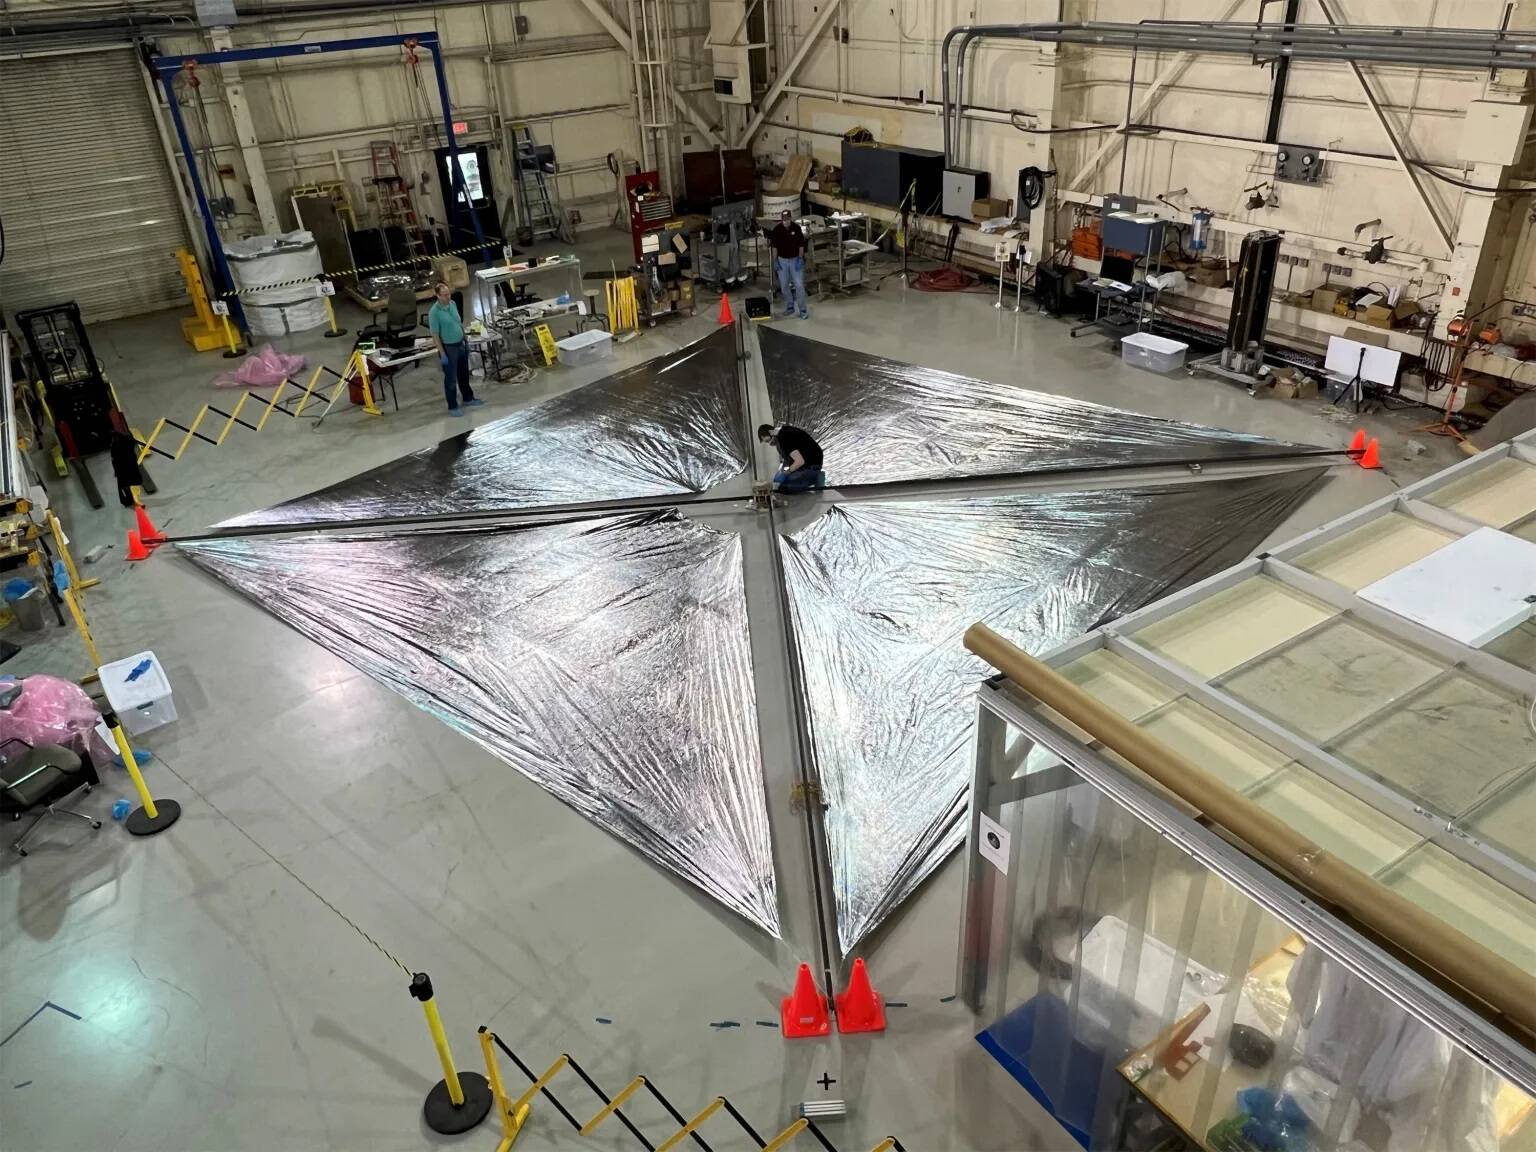 NASA is to send a solar sail demonstrator into orbit next week, and there is a good chance that the sail, measuring 860 square feet (80 square meters)